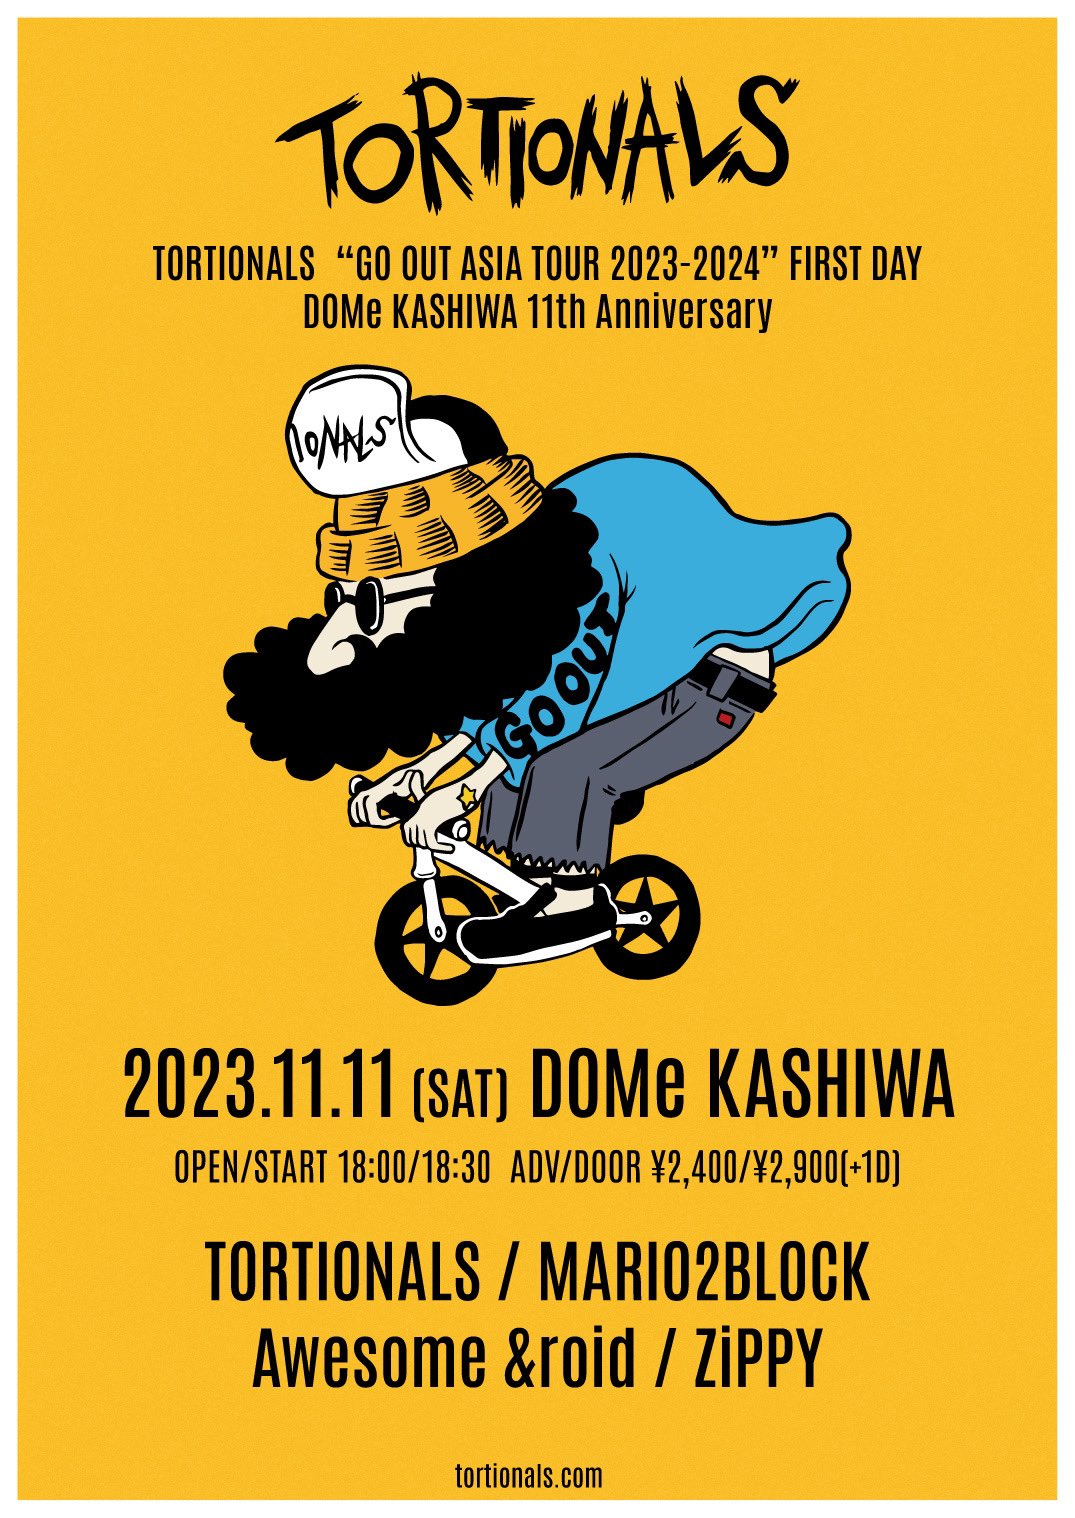 TORTIONALS “GO OUT ASIA TOUR 2023-2024” FIRST DAY DOMe Kashiwa 11th Anniversary